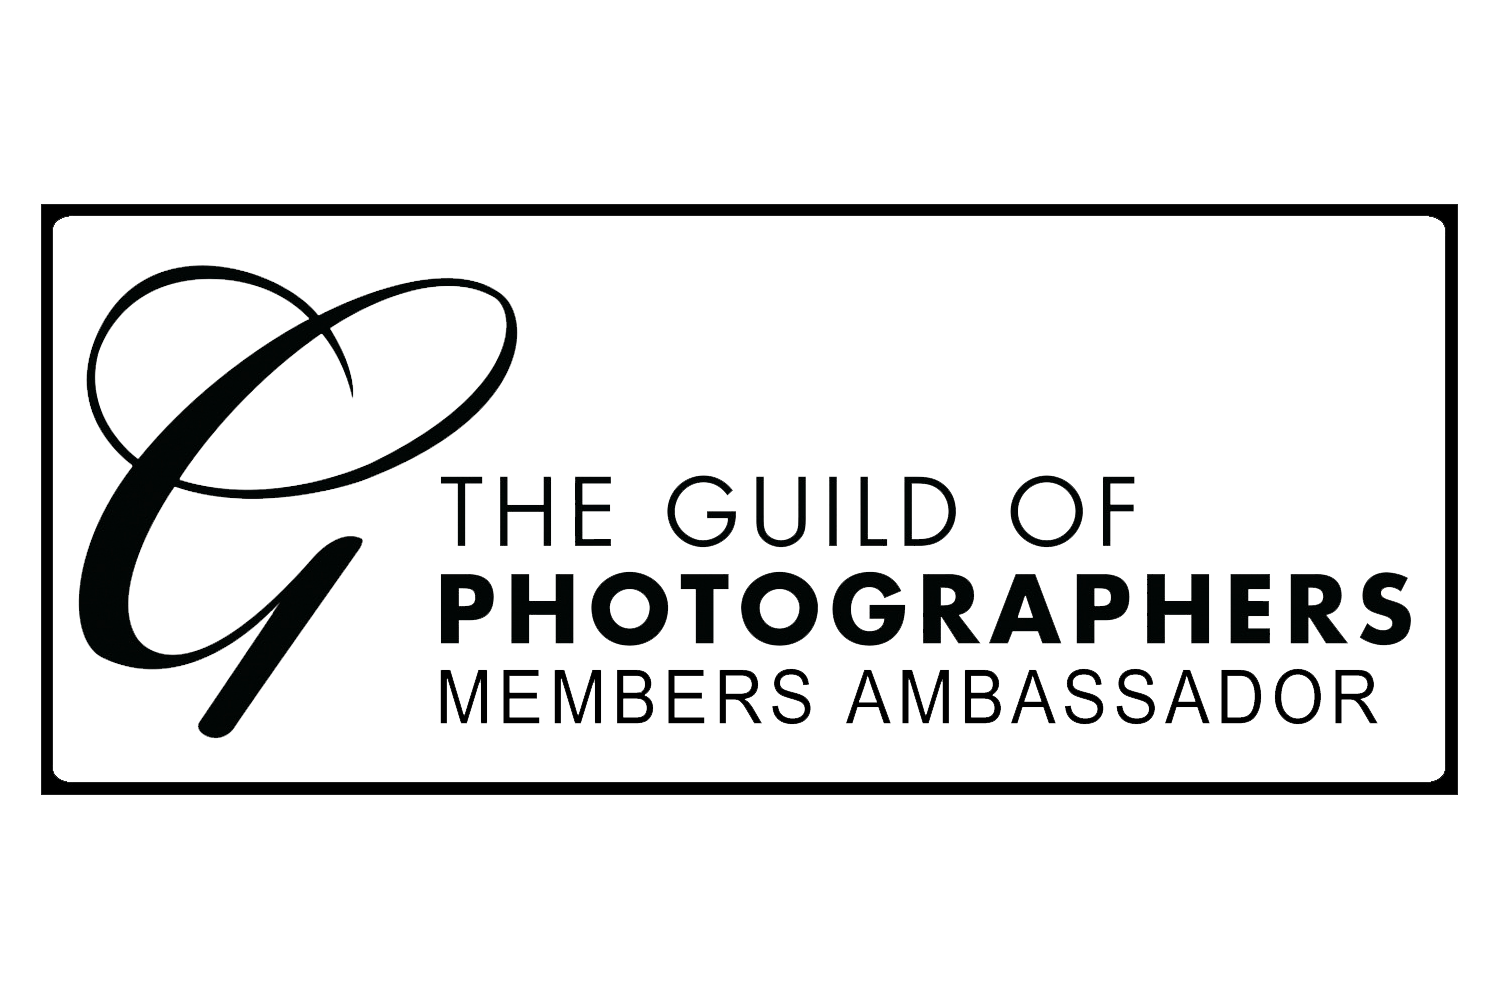 Members Ambassador for The Guild of Photographers.